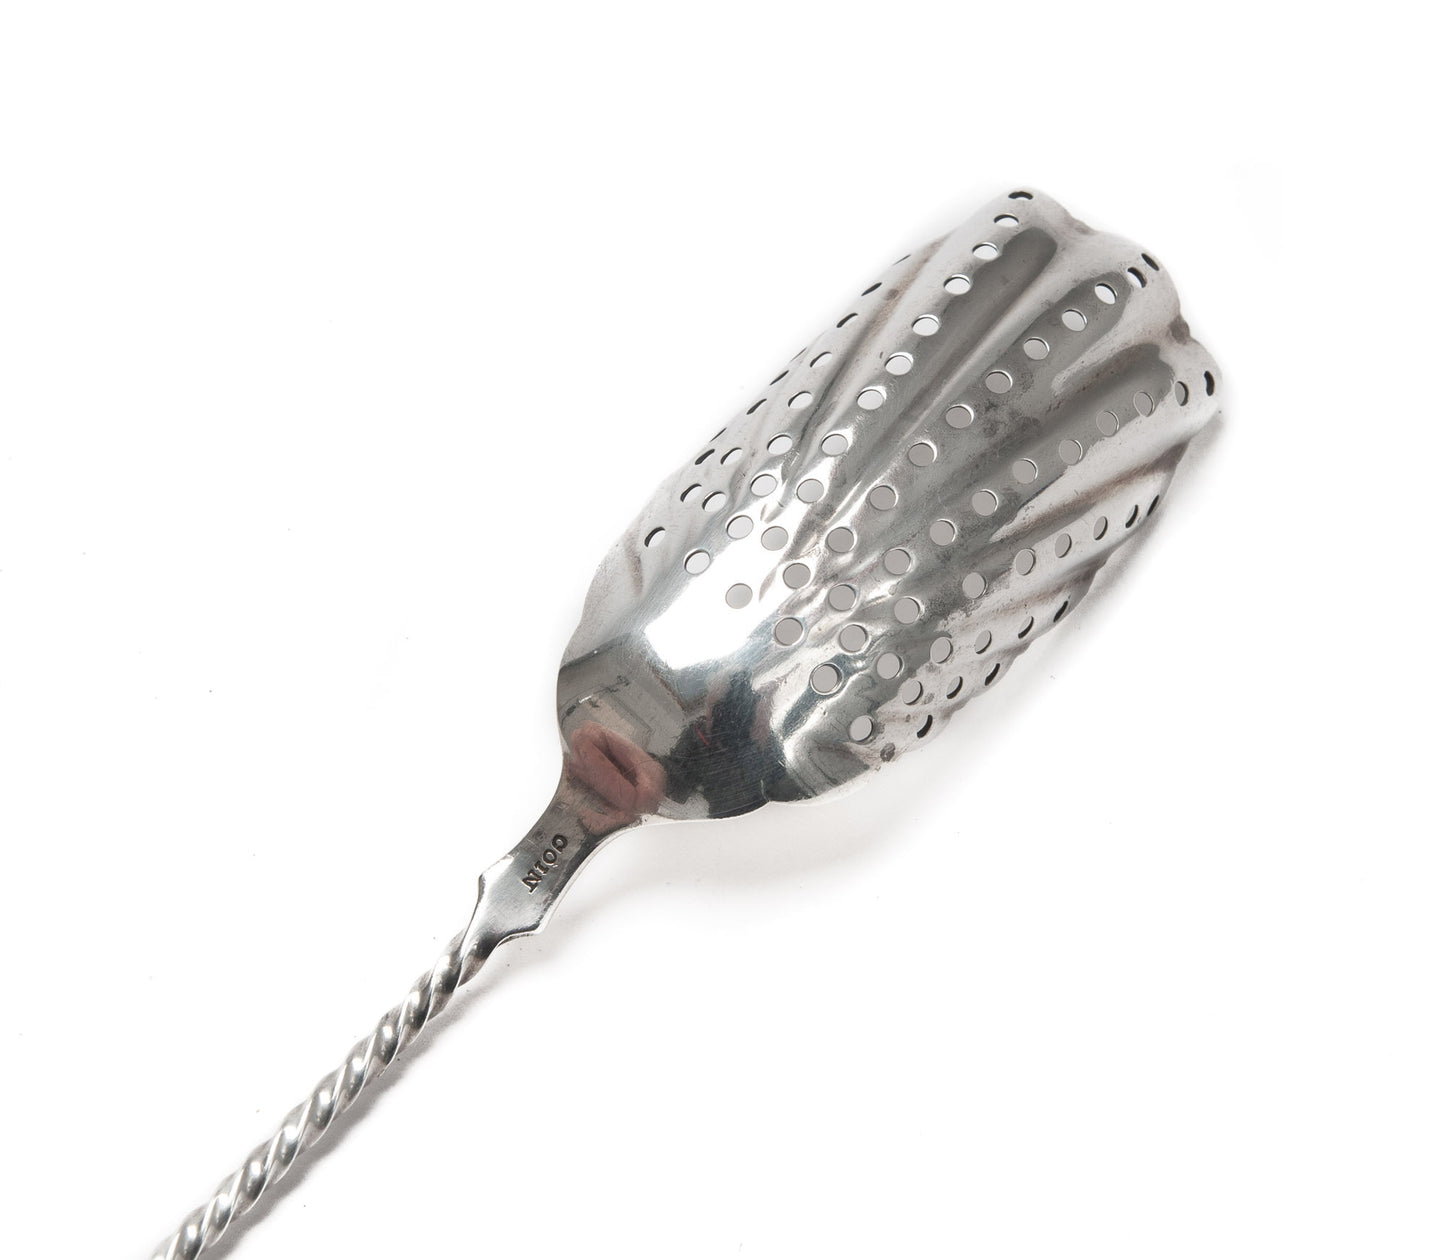 Antique Mid 19th Century American Coin Silver Pickle Fork with Rope Twist Handle (Code 2087)